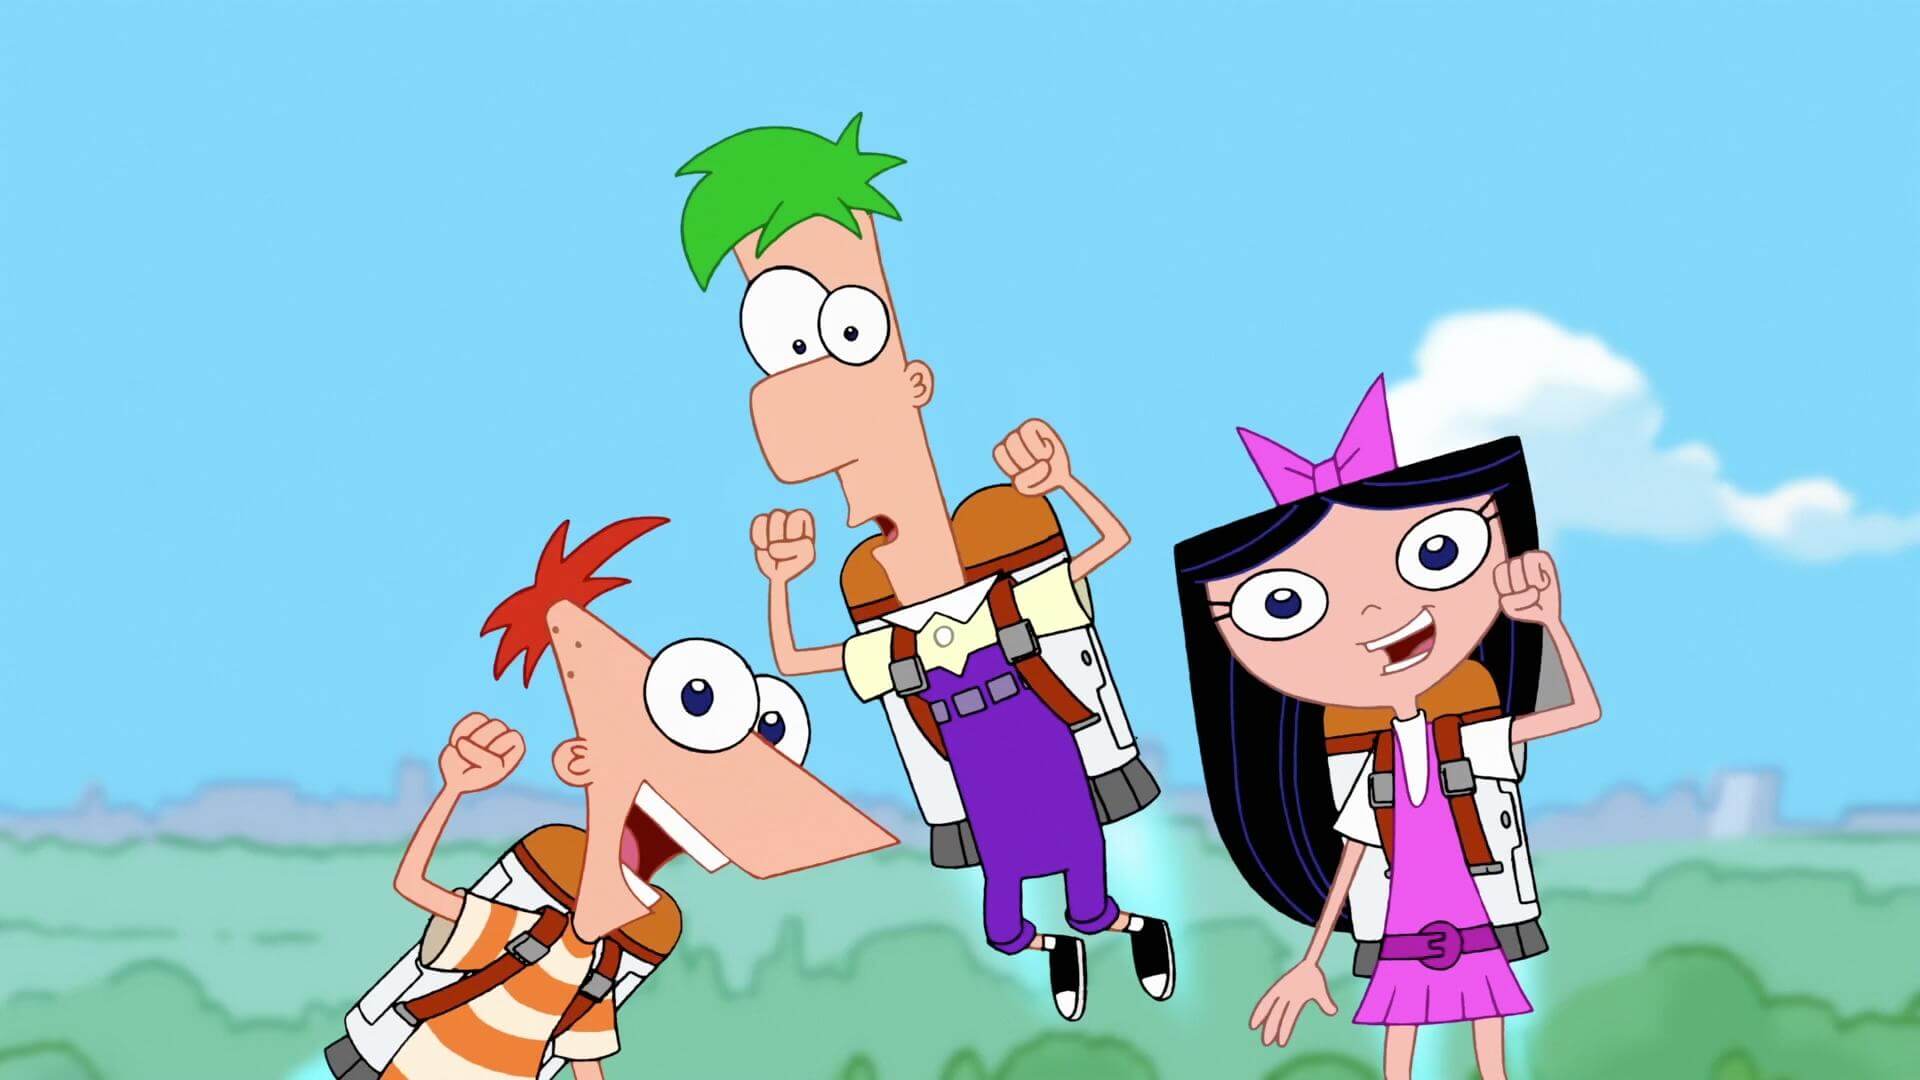 phineas and ferb Zoom Background - Pericror - Latest of 2021.